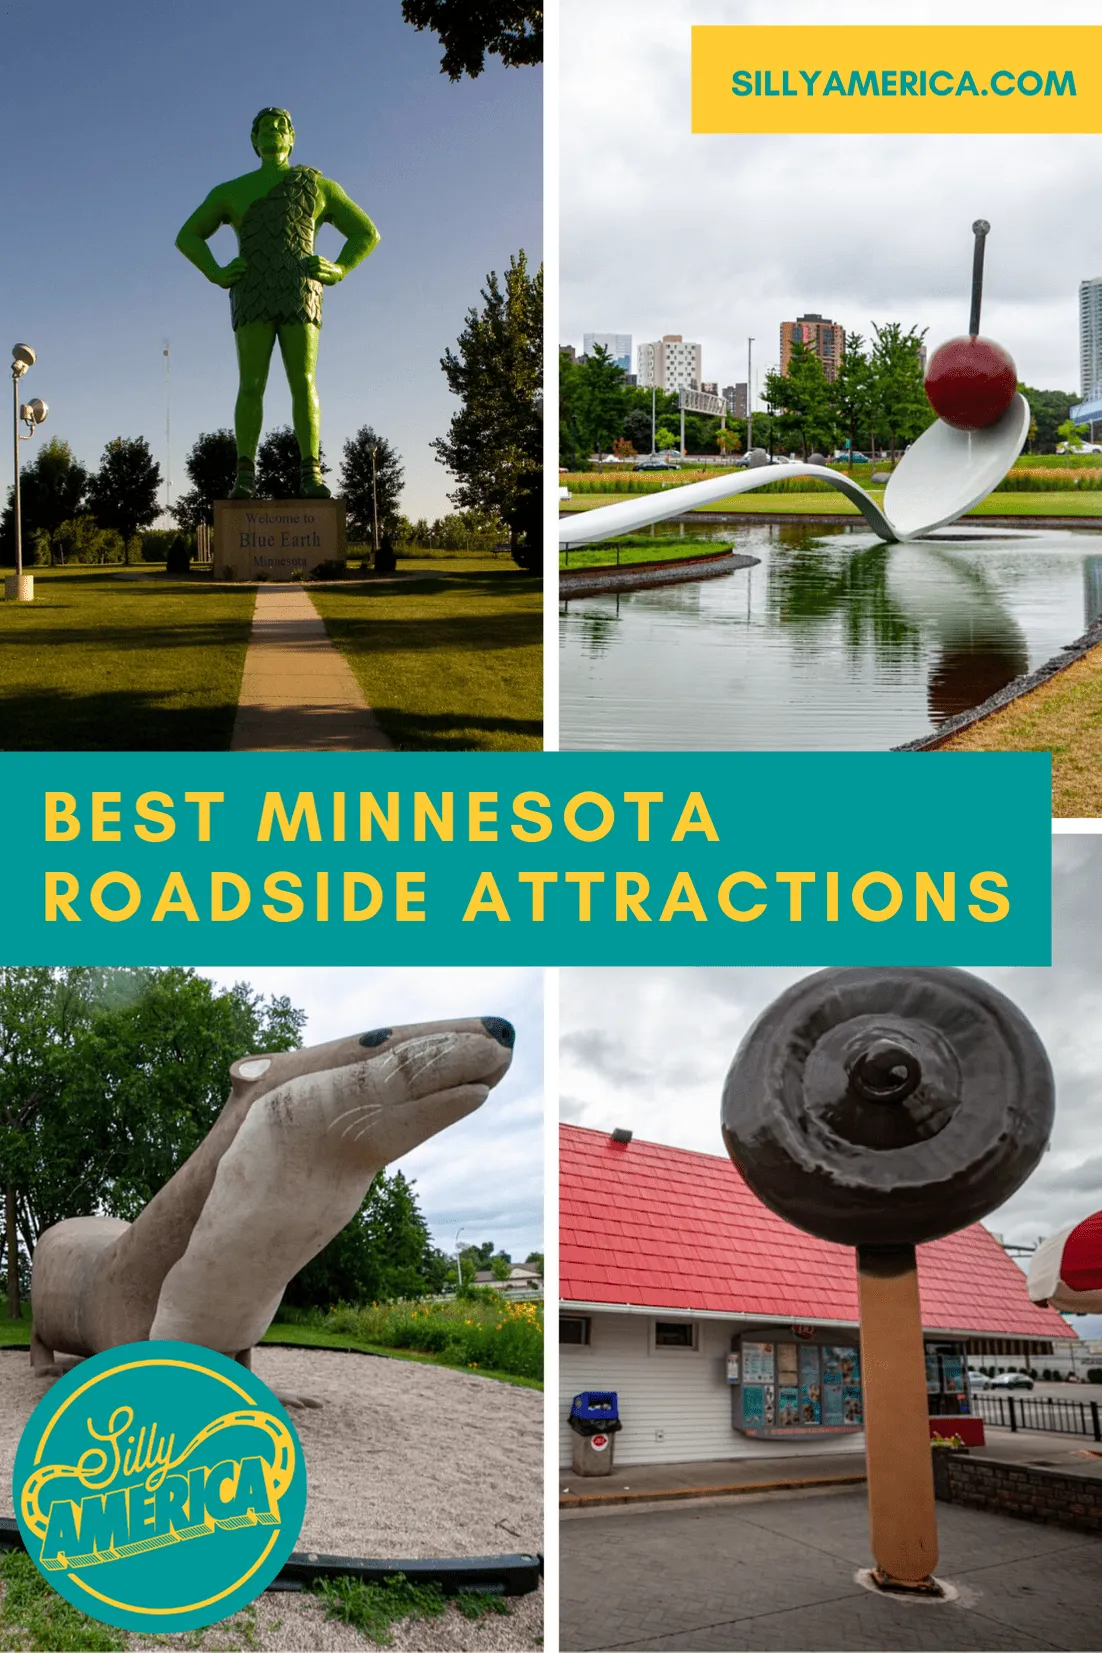 The best Minnesota roadside attractions to visit on a Minnesota road trip or weekend getaway. Add these roadside oddities and road trip stops to your bucket list and visit these roadside attractions in Minnesota on your next travel adventure.   #MinnesotaRoadsideAttractions #MinnesotaRoadsideAttraction #RoadsideAttractions #RoadsideAttraction #RoadTrip #MinnesotaRoadTrip #MinnesotaRoadTripBucketLists #MinnesotaBucketList #MinnesotaRoadTripMap #MinnesotaRoadTripIdeas #WeirdRoadsideAttractions